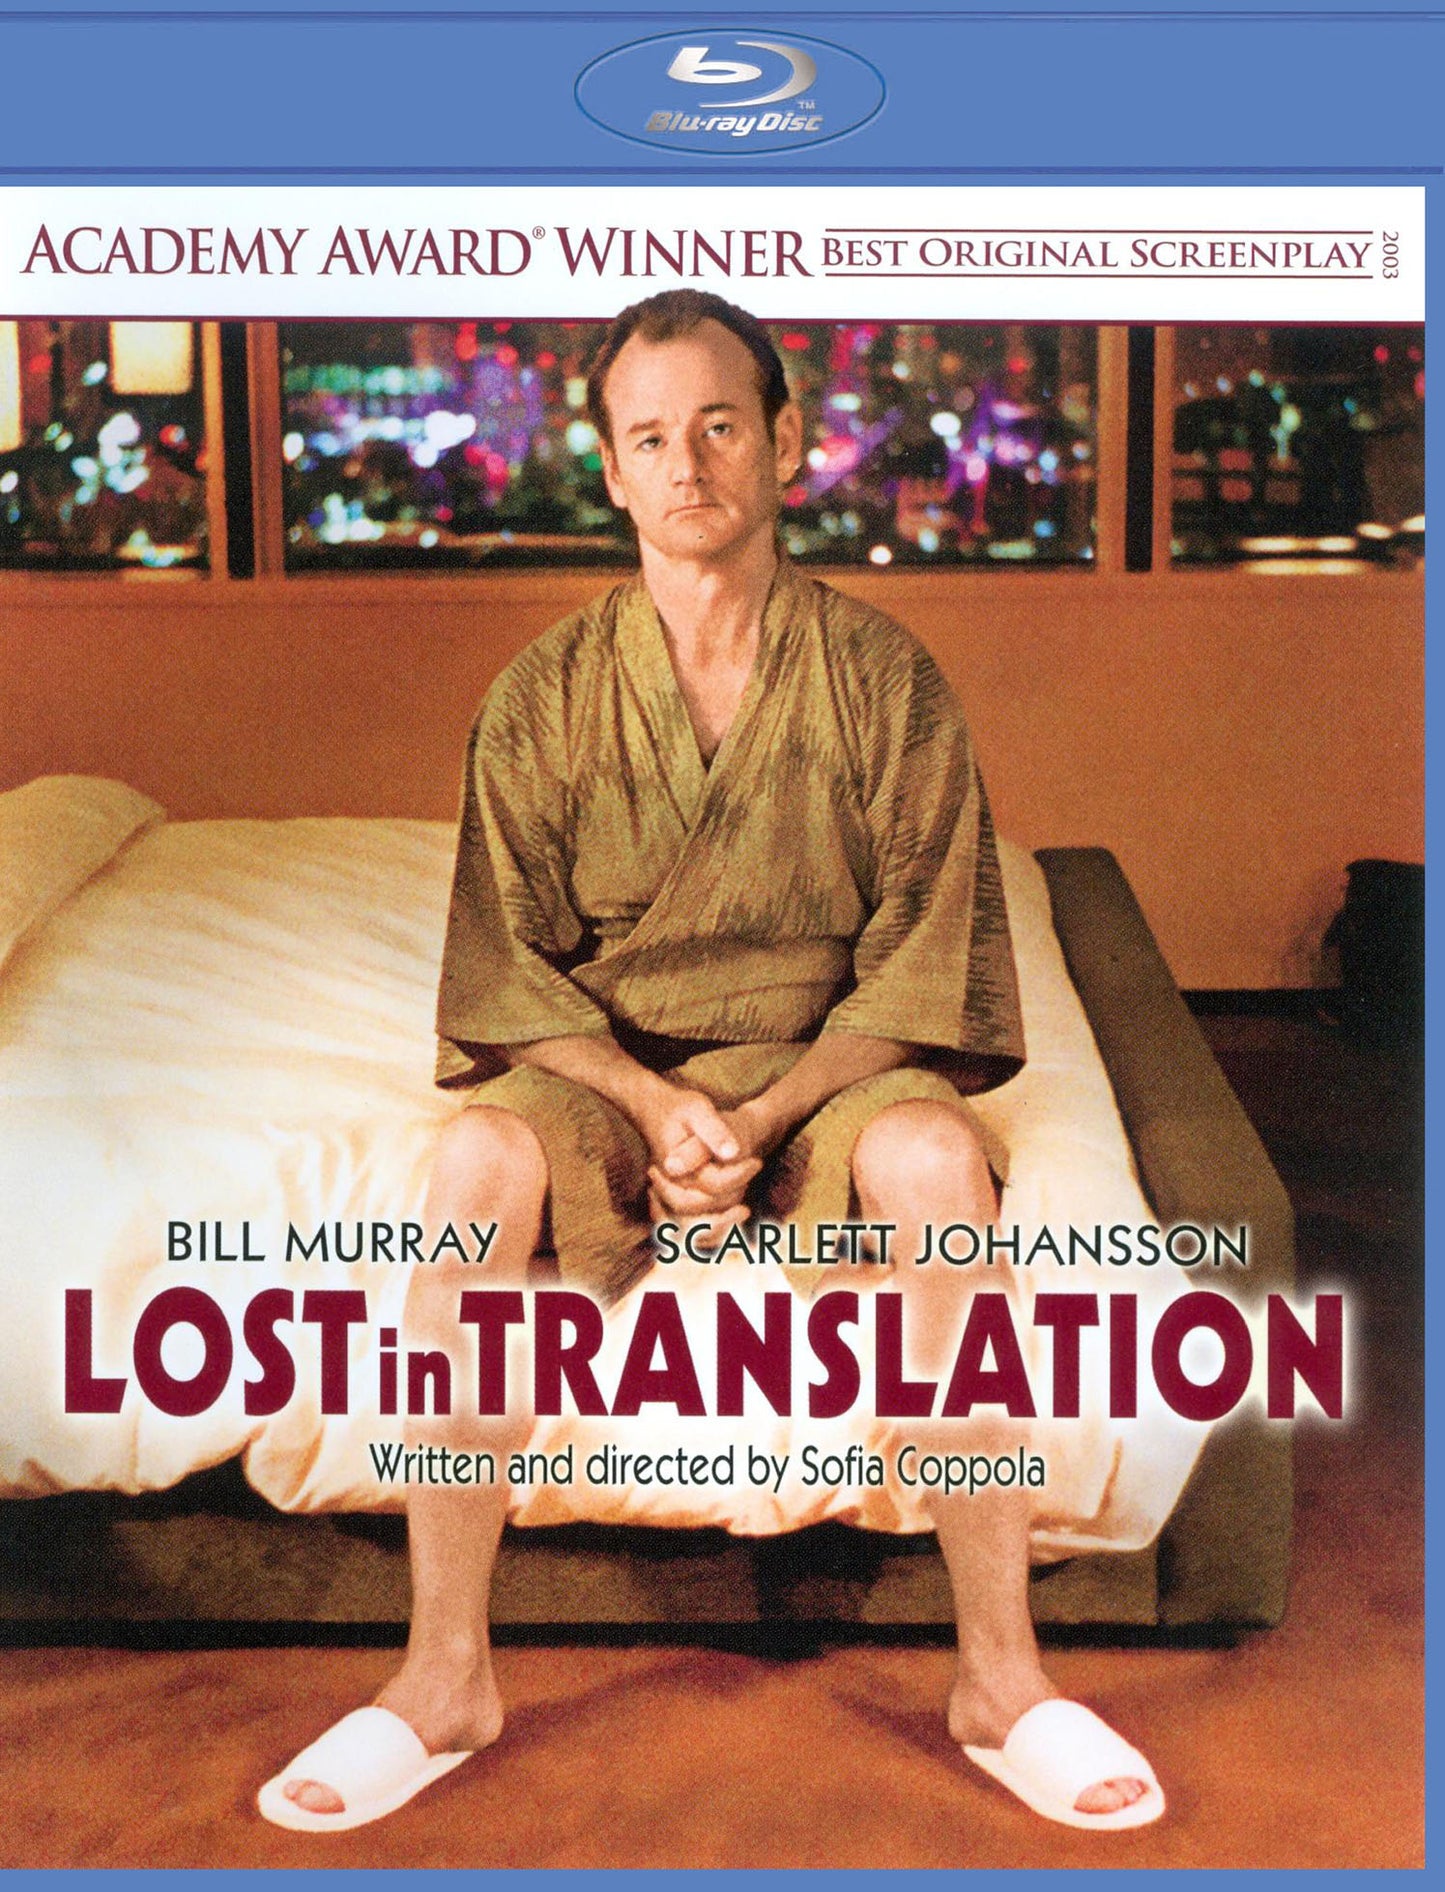 Lost in Translation [Blu-ray] cover art